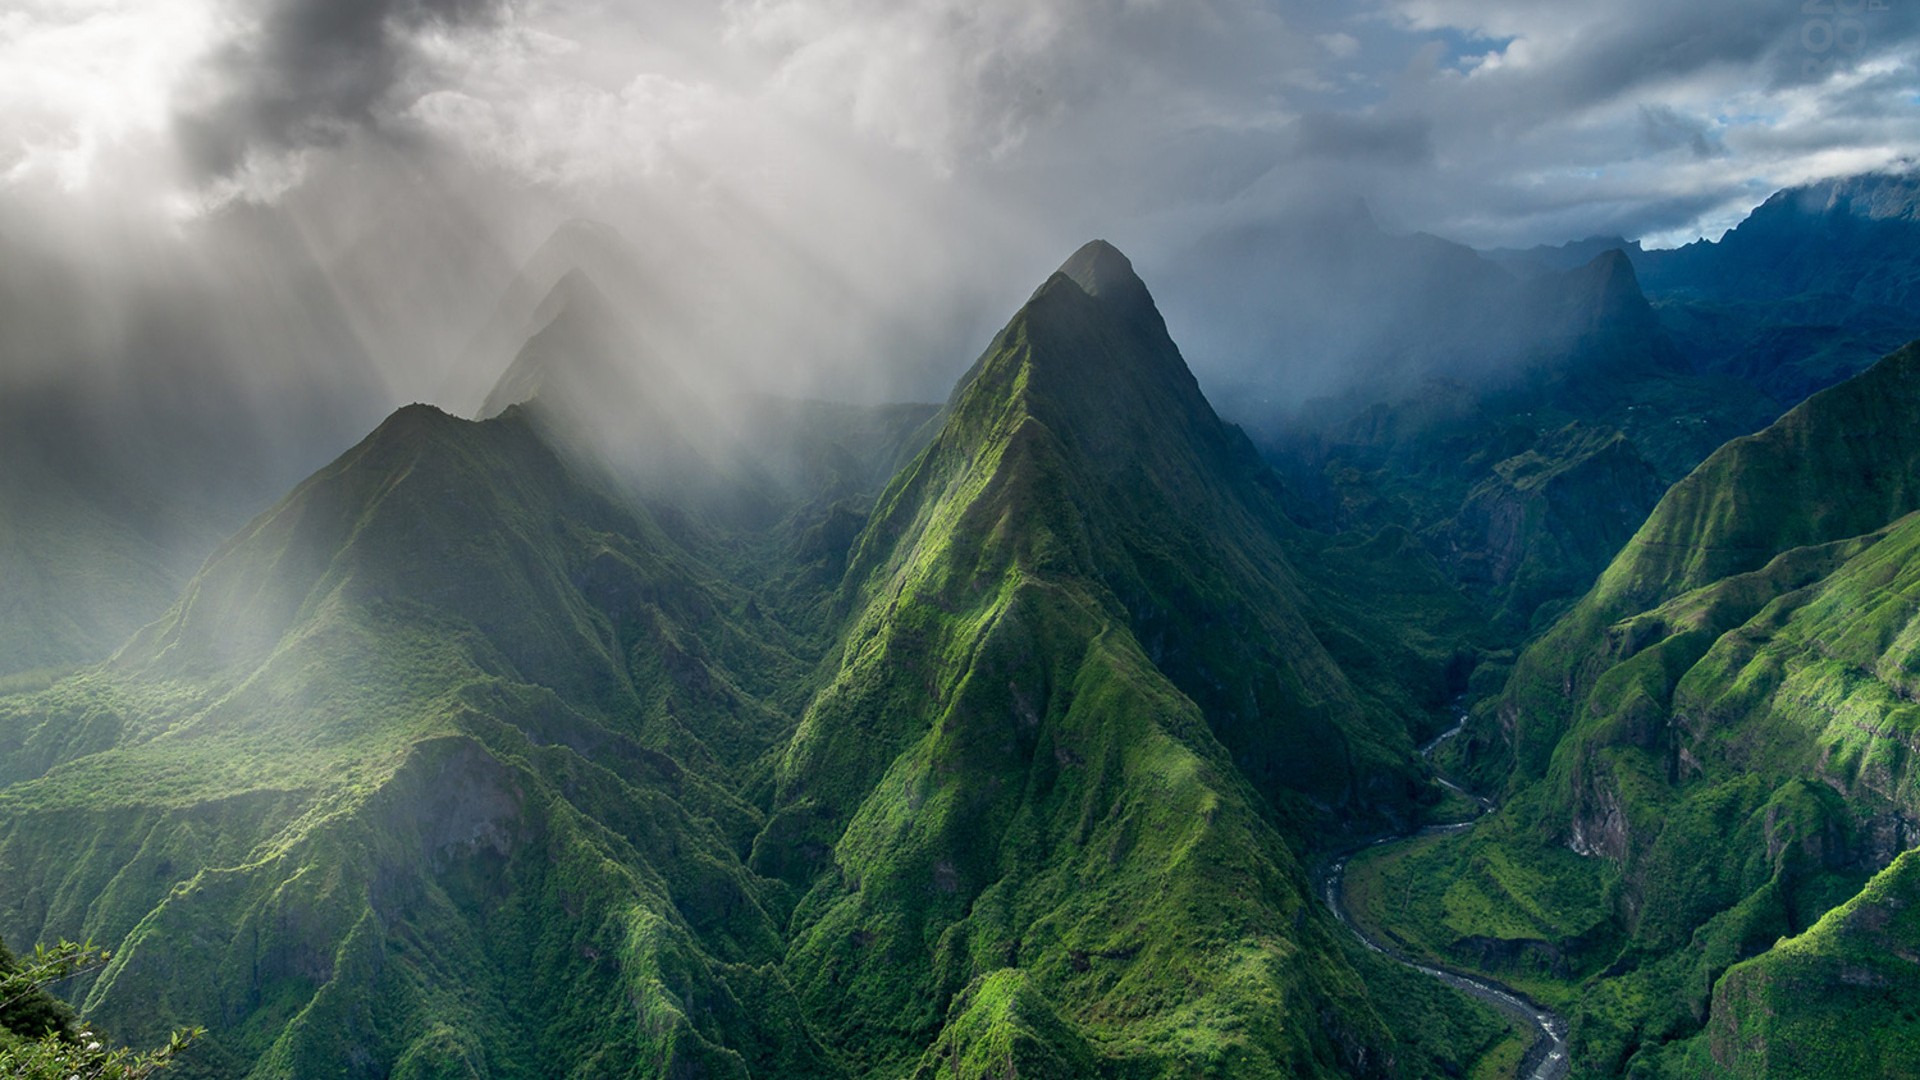 Download 1920x1080 reunion island mountains clouds photography